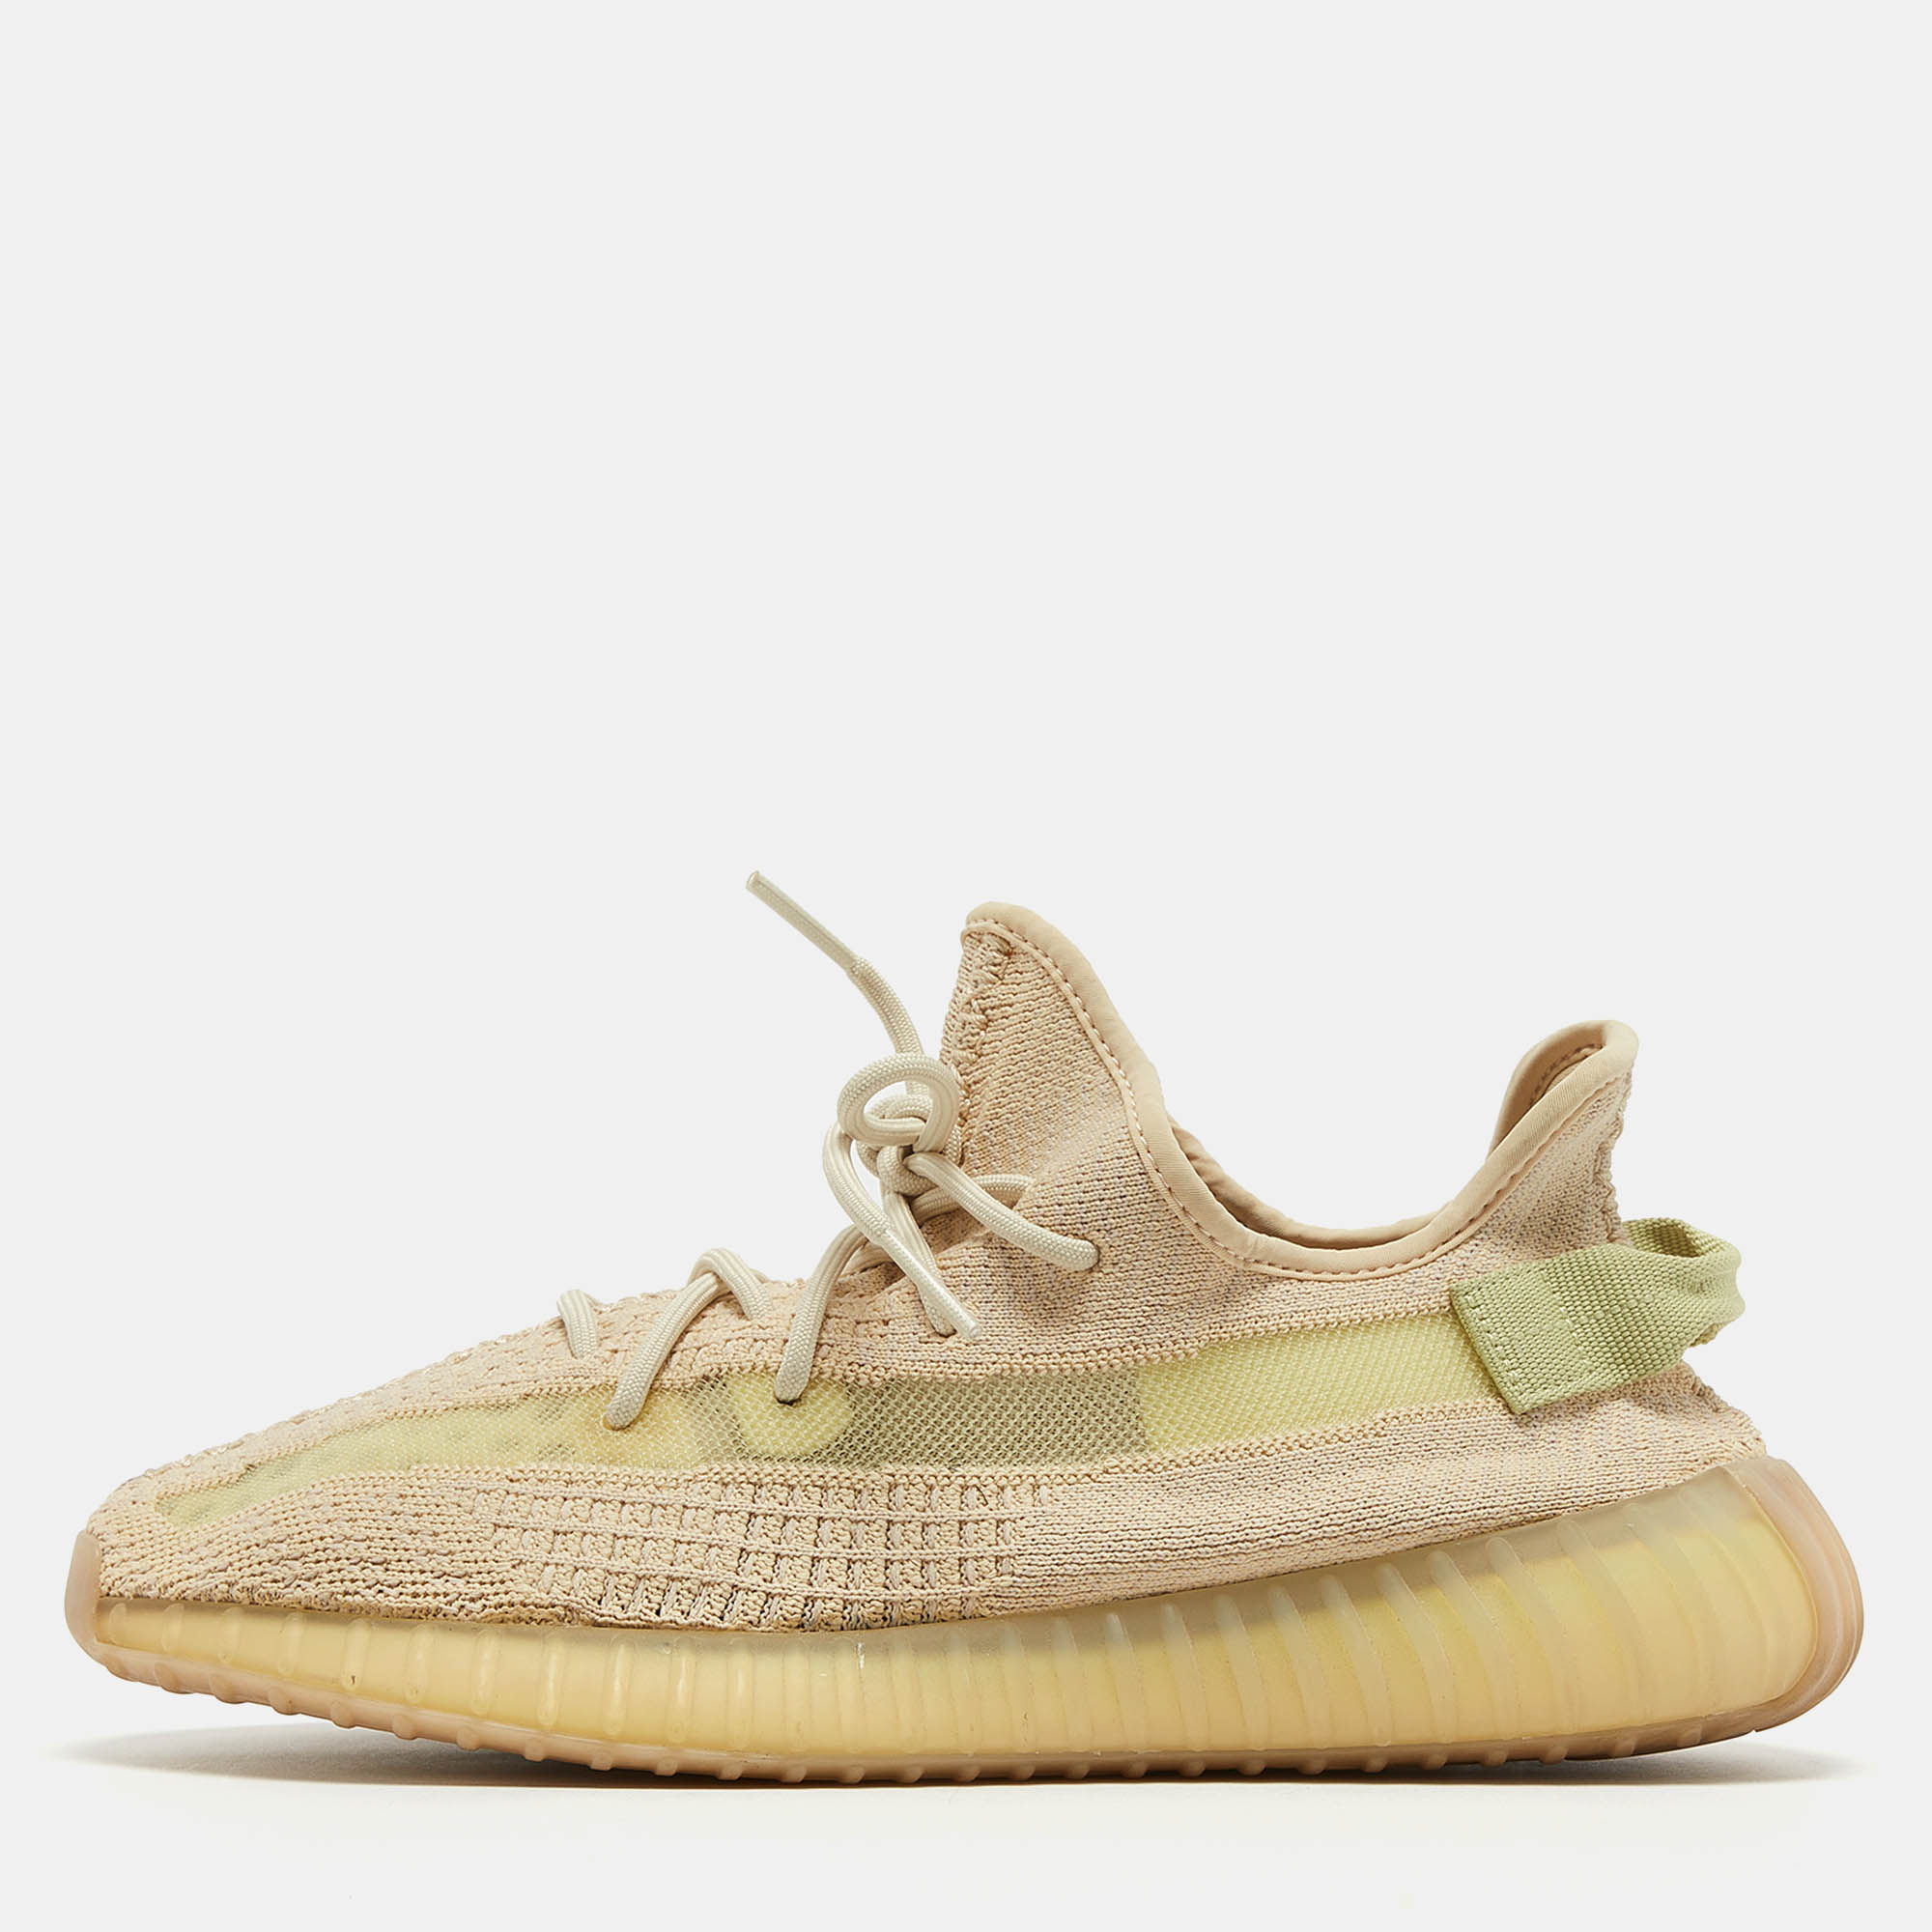 Yeezy x adidas light yellow knit fabric boost 350 v2 butter sneakers size 44